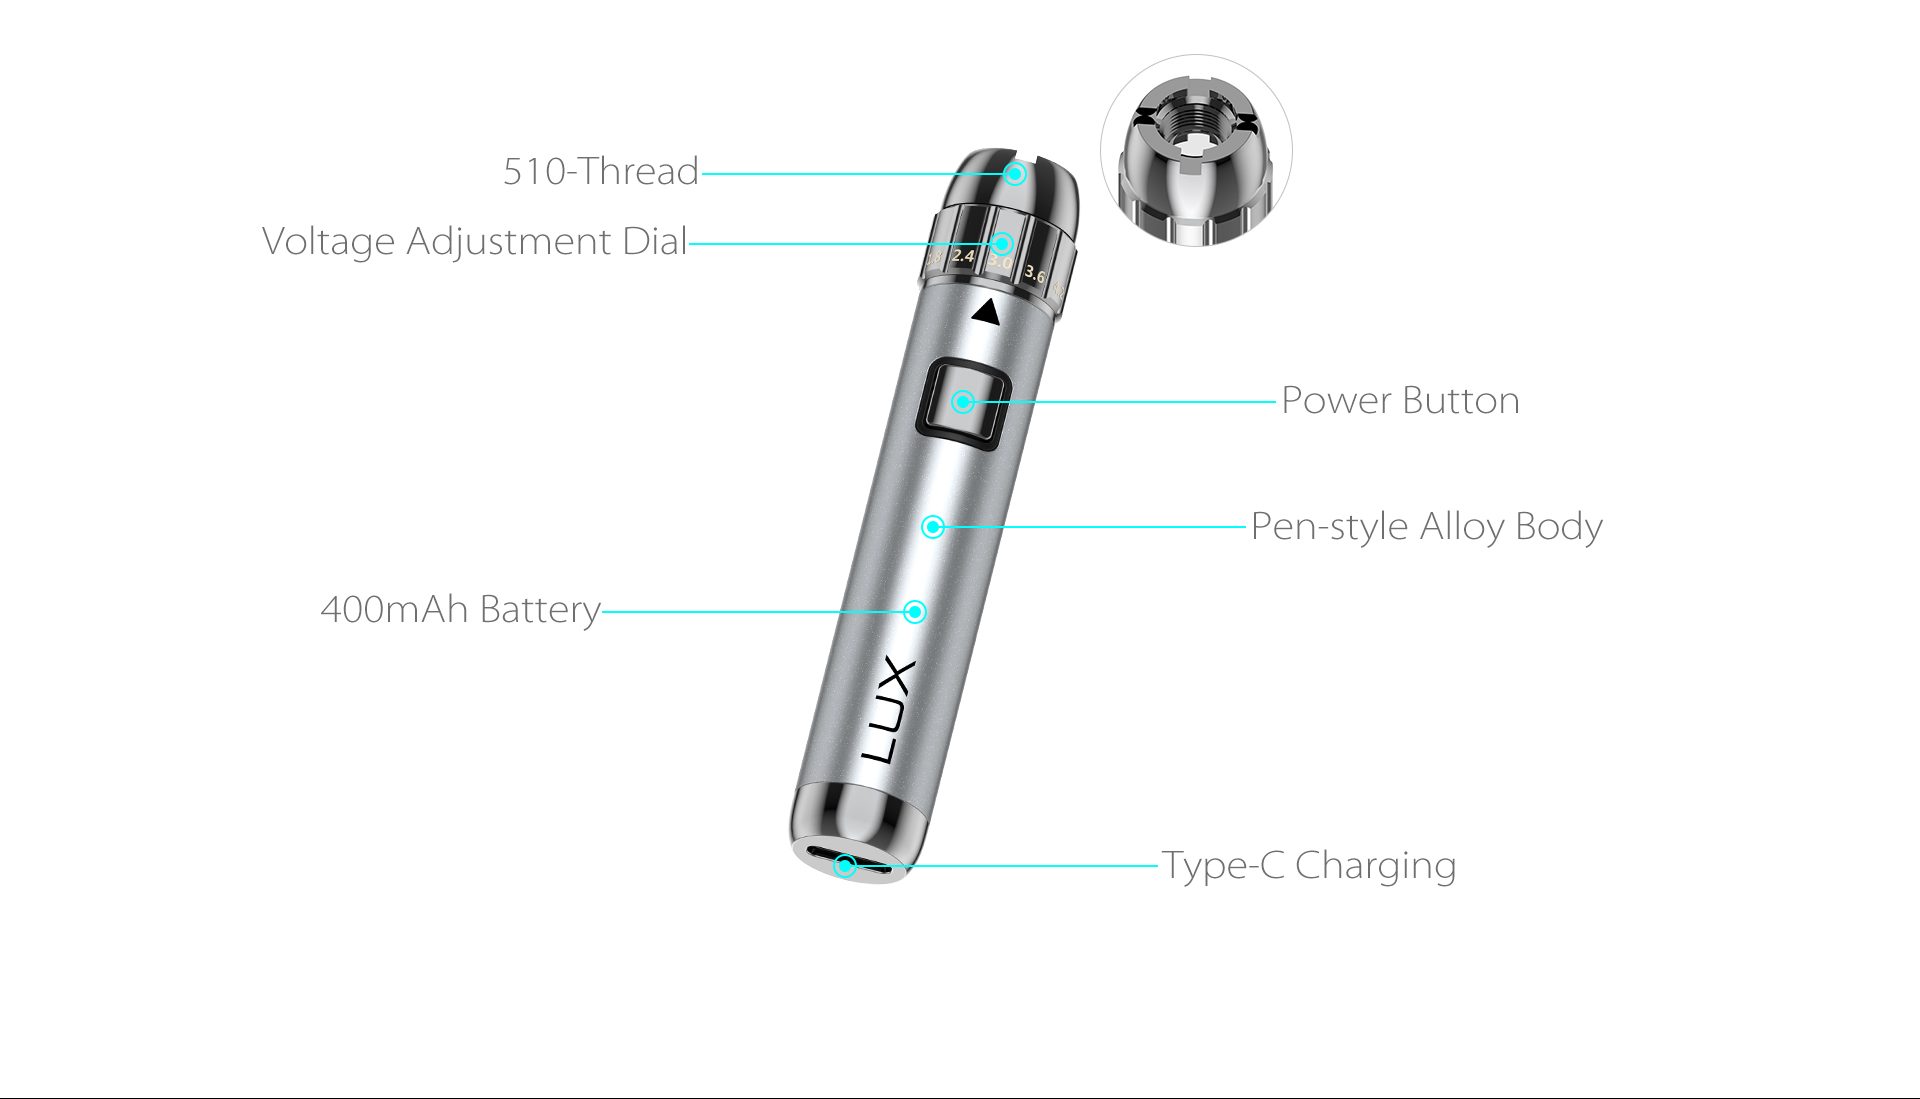 The exploded view of Yocan LUX 510 Threaded Vape Pen Battery